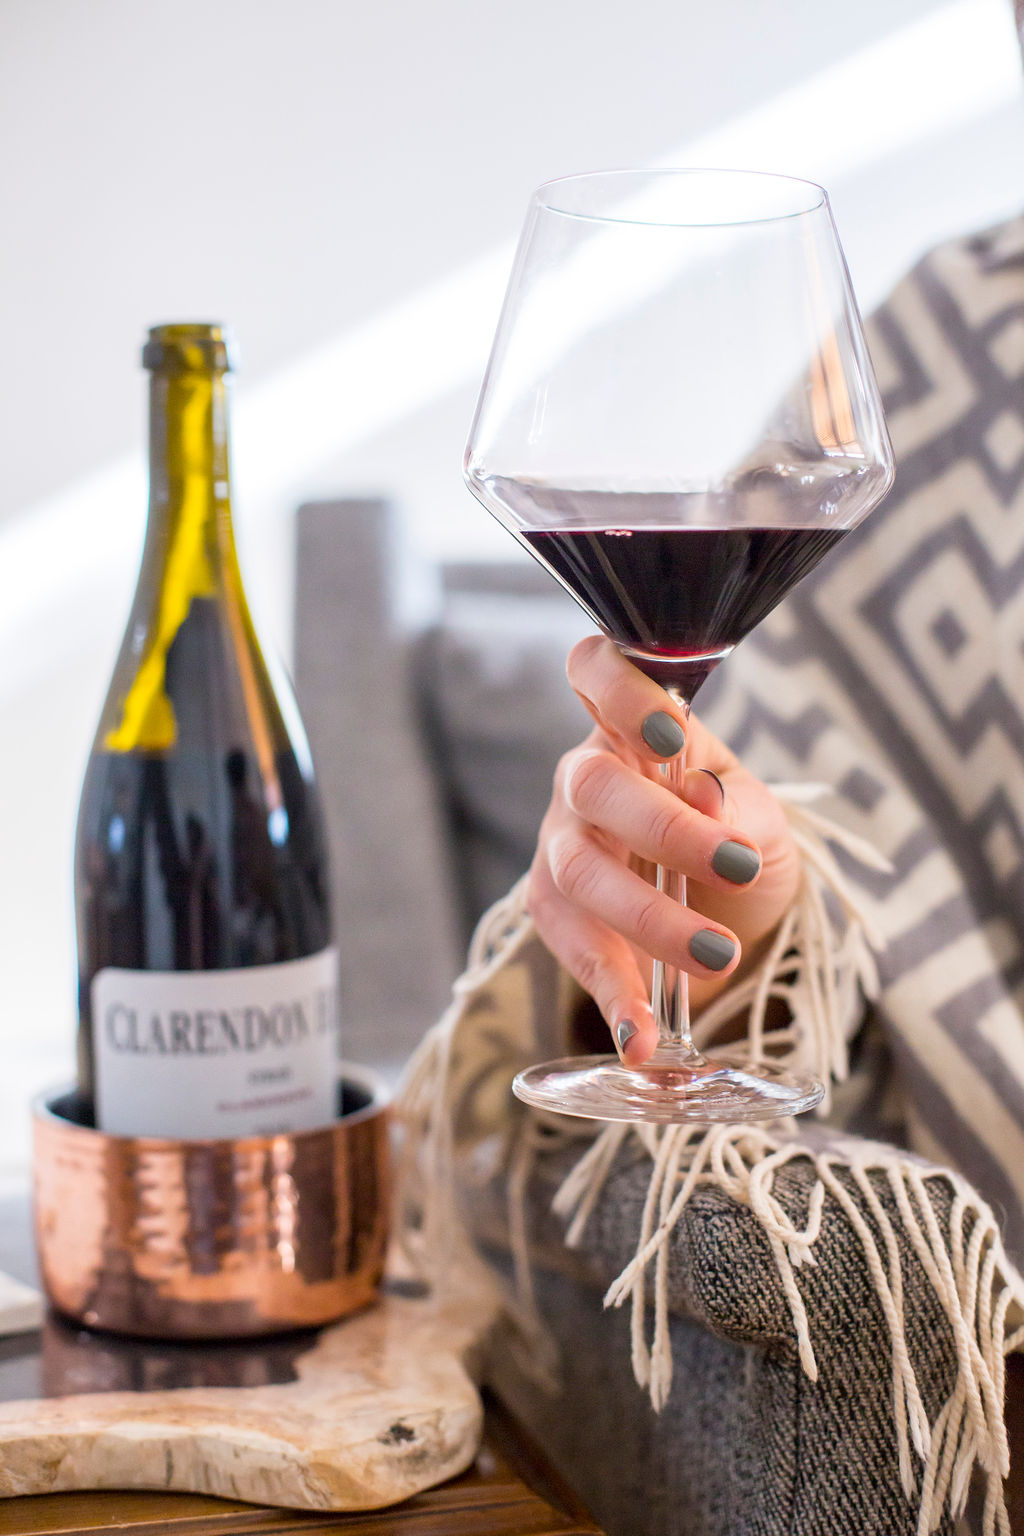 Our Favorite Wine and Movie Pairings for Galentine’s Day